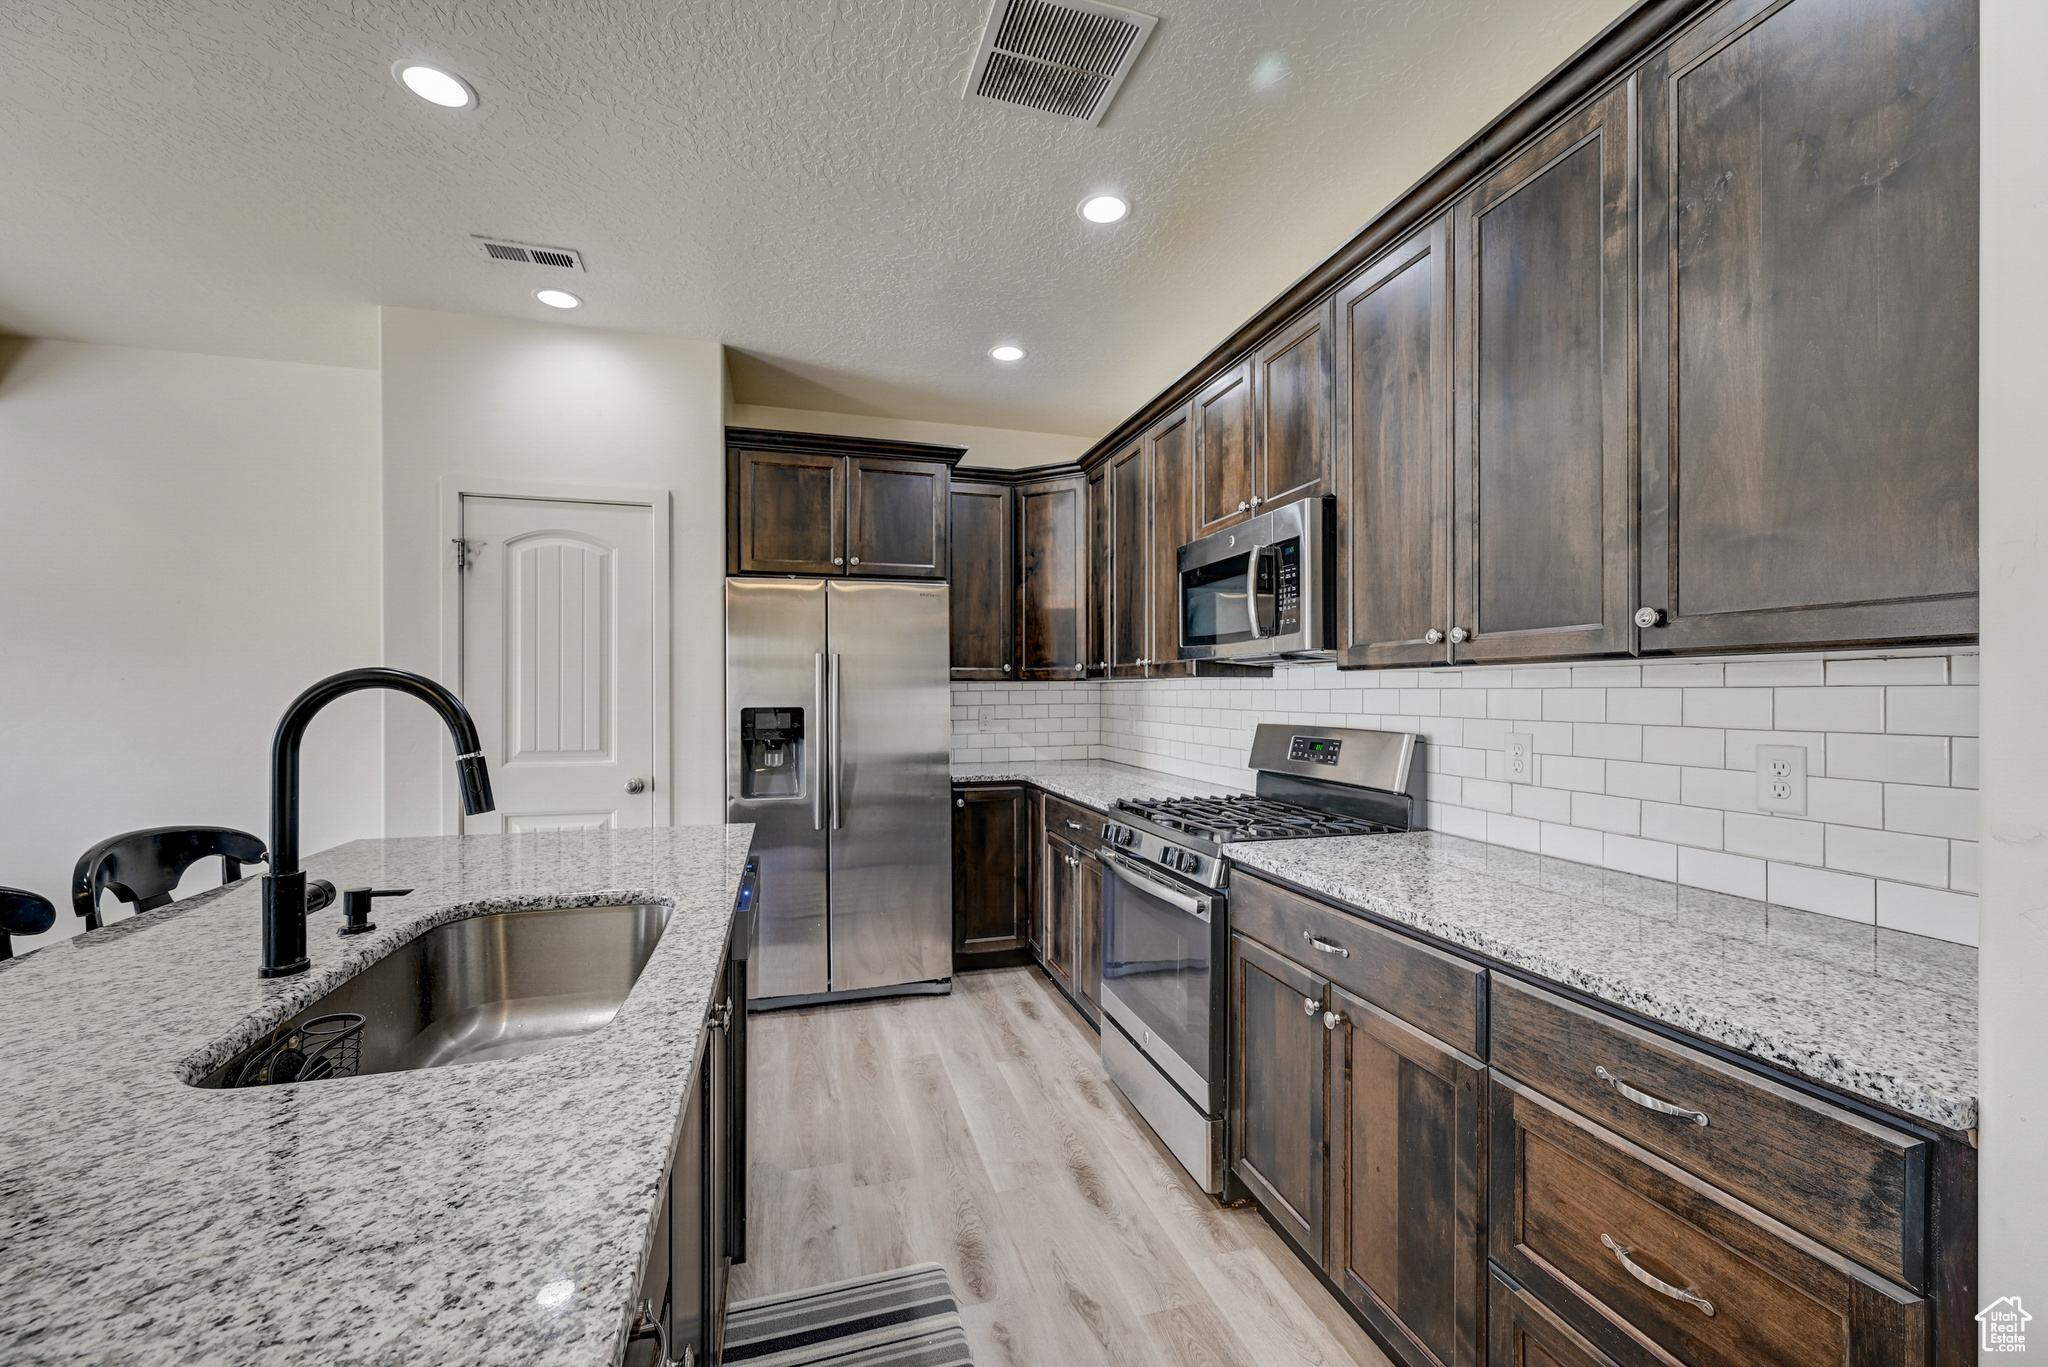 Kitchen featuring light stone counters, light hardwood / wood-style floors, dark brown cabinets, stainless steel appliances, and sink